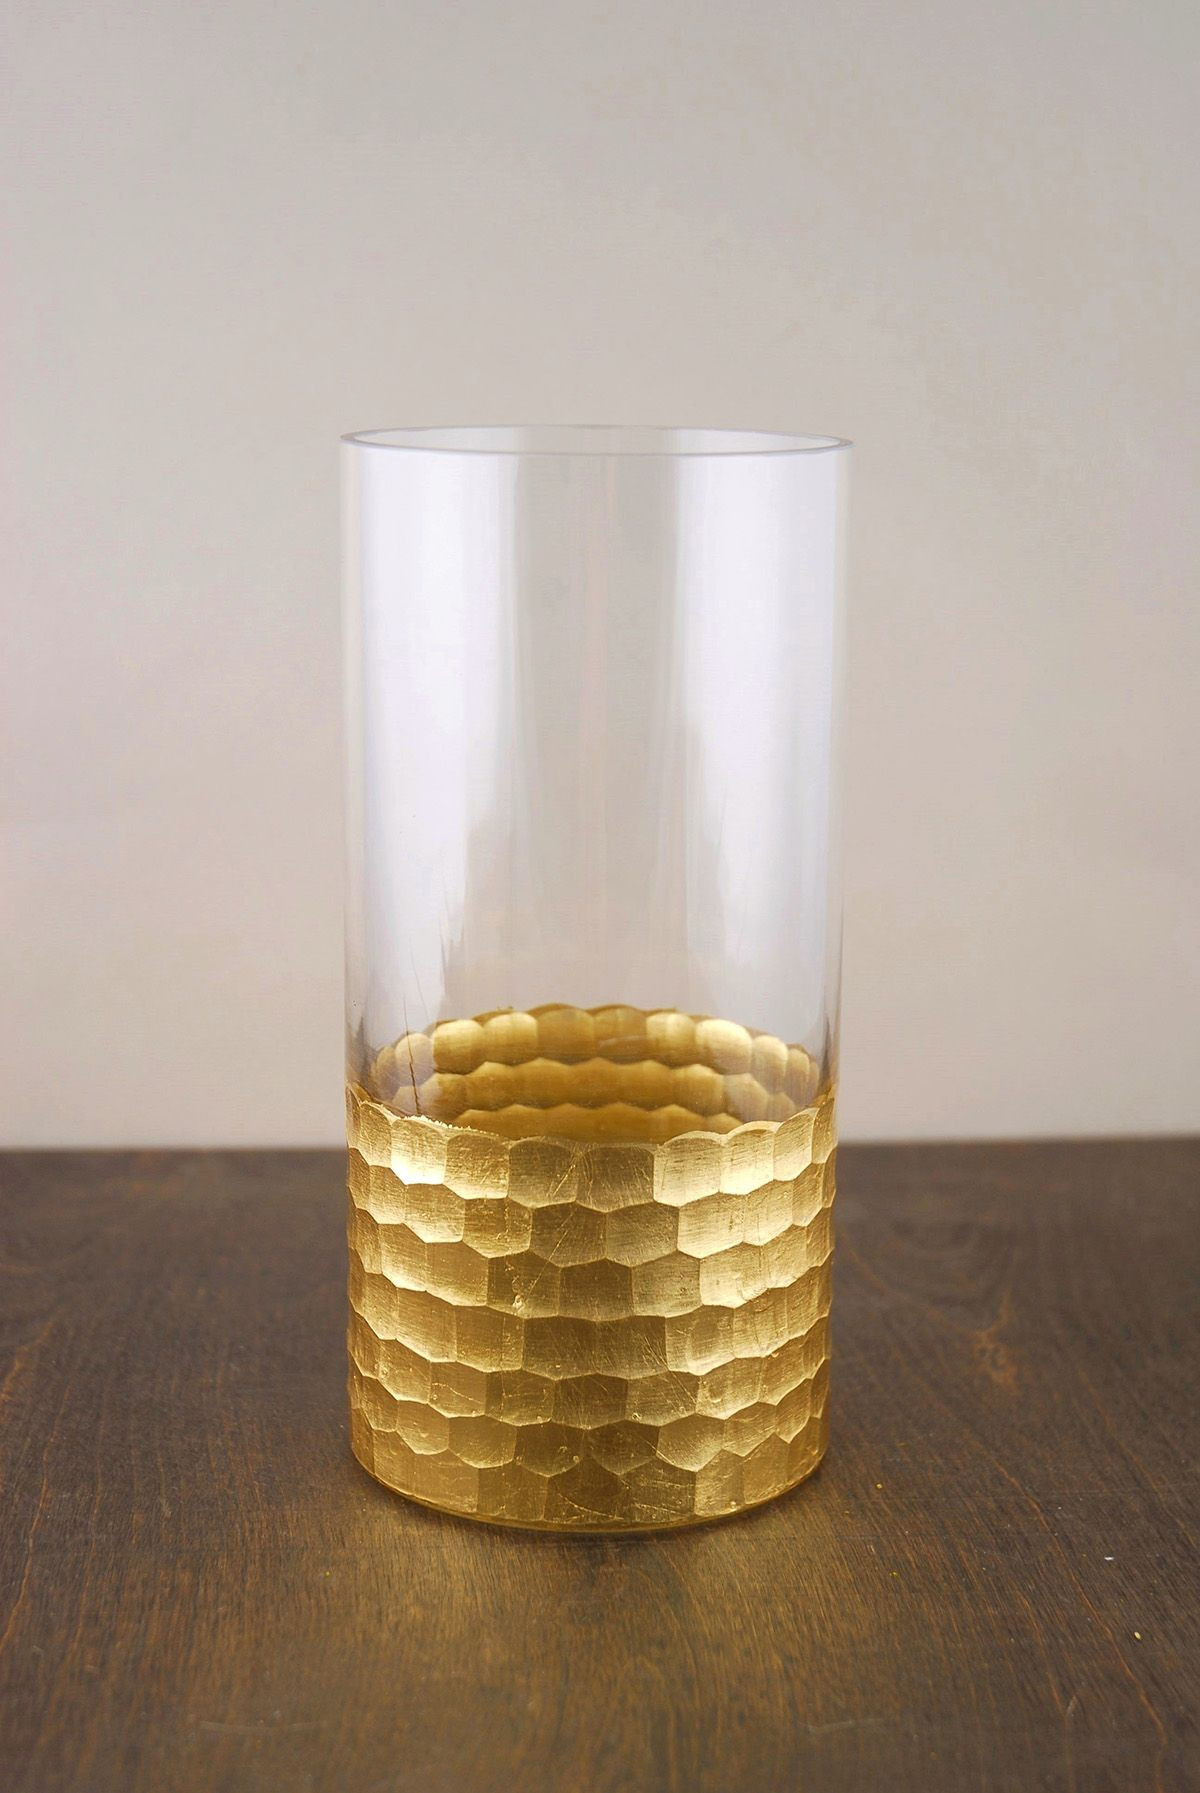 18 Famous 20 Inch Plastic Cylinder Vases 2024 free download 20 inch plastic cylinder vases of gold cylinder vases images gold honey b cylinder vase 8 x 4 for gold cylinder vases images gold honey b cylinder vase 8 x 4